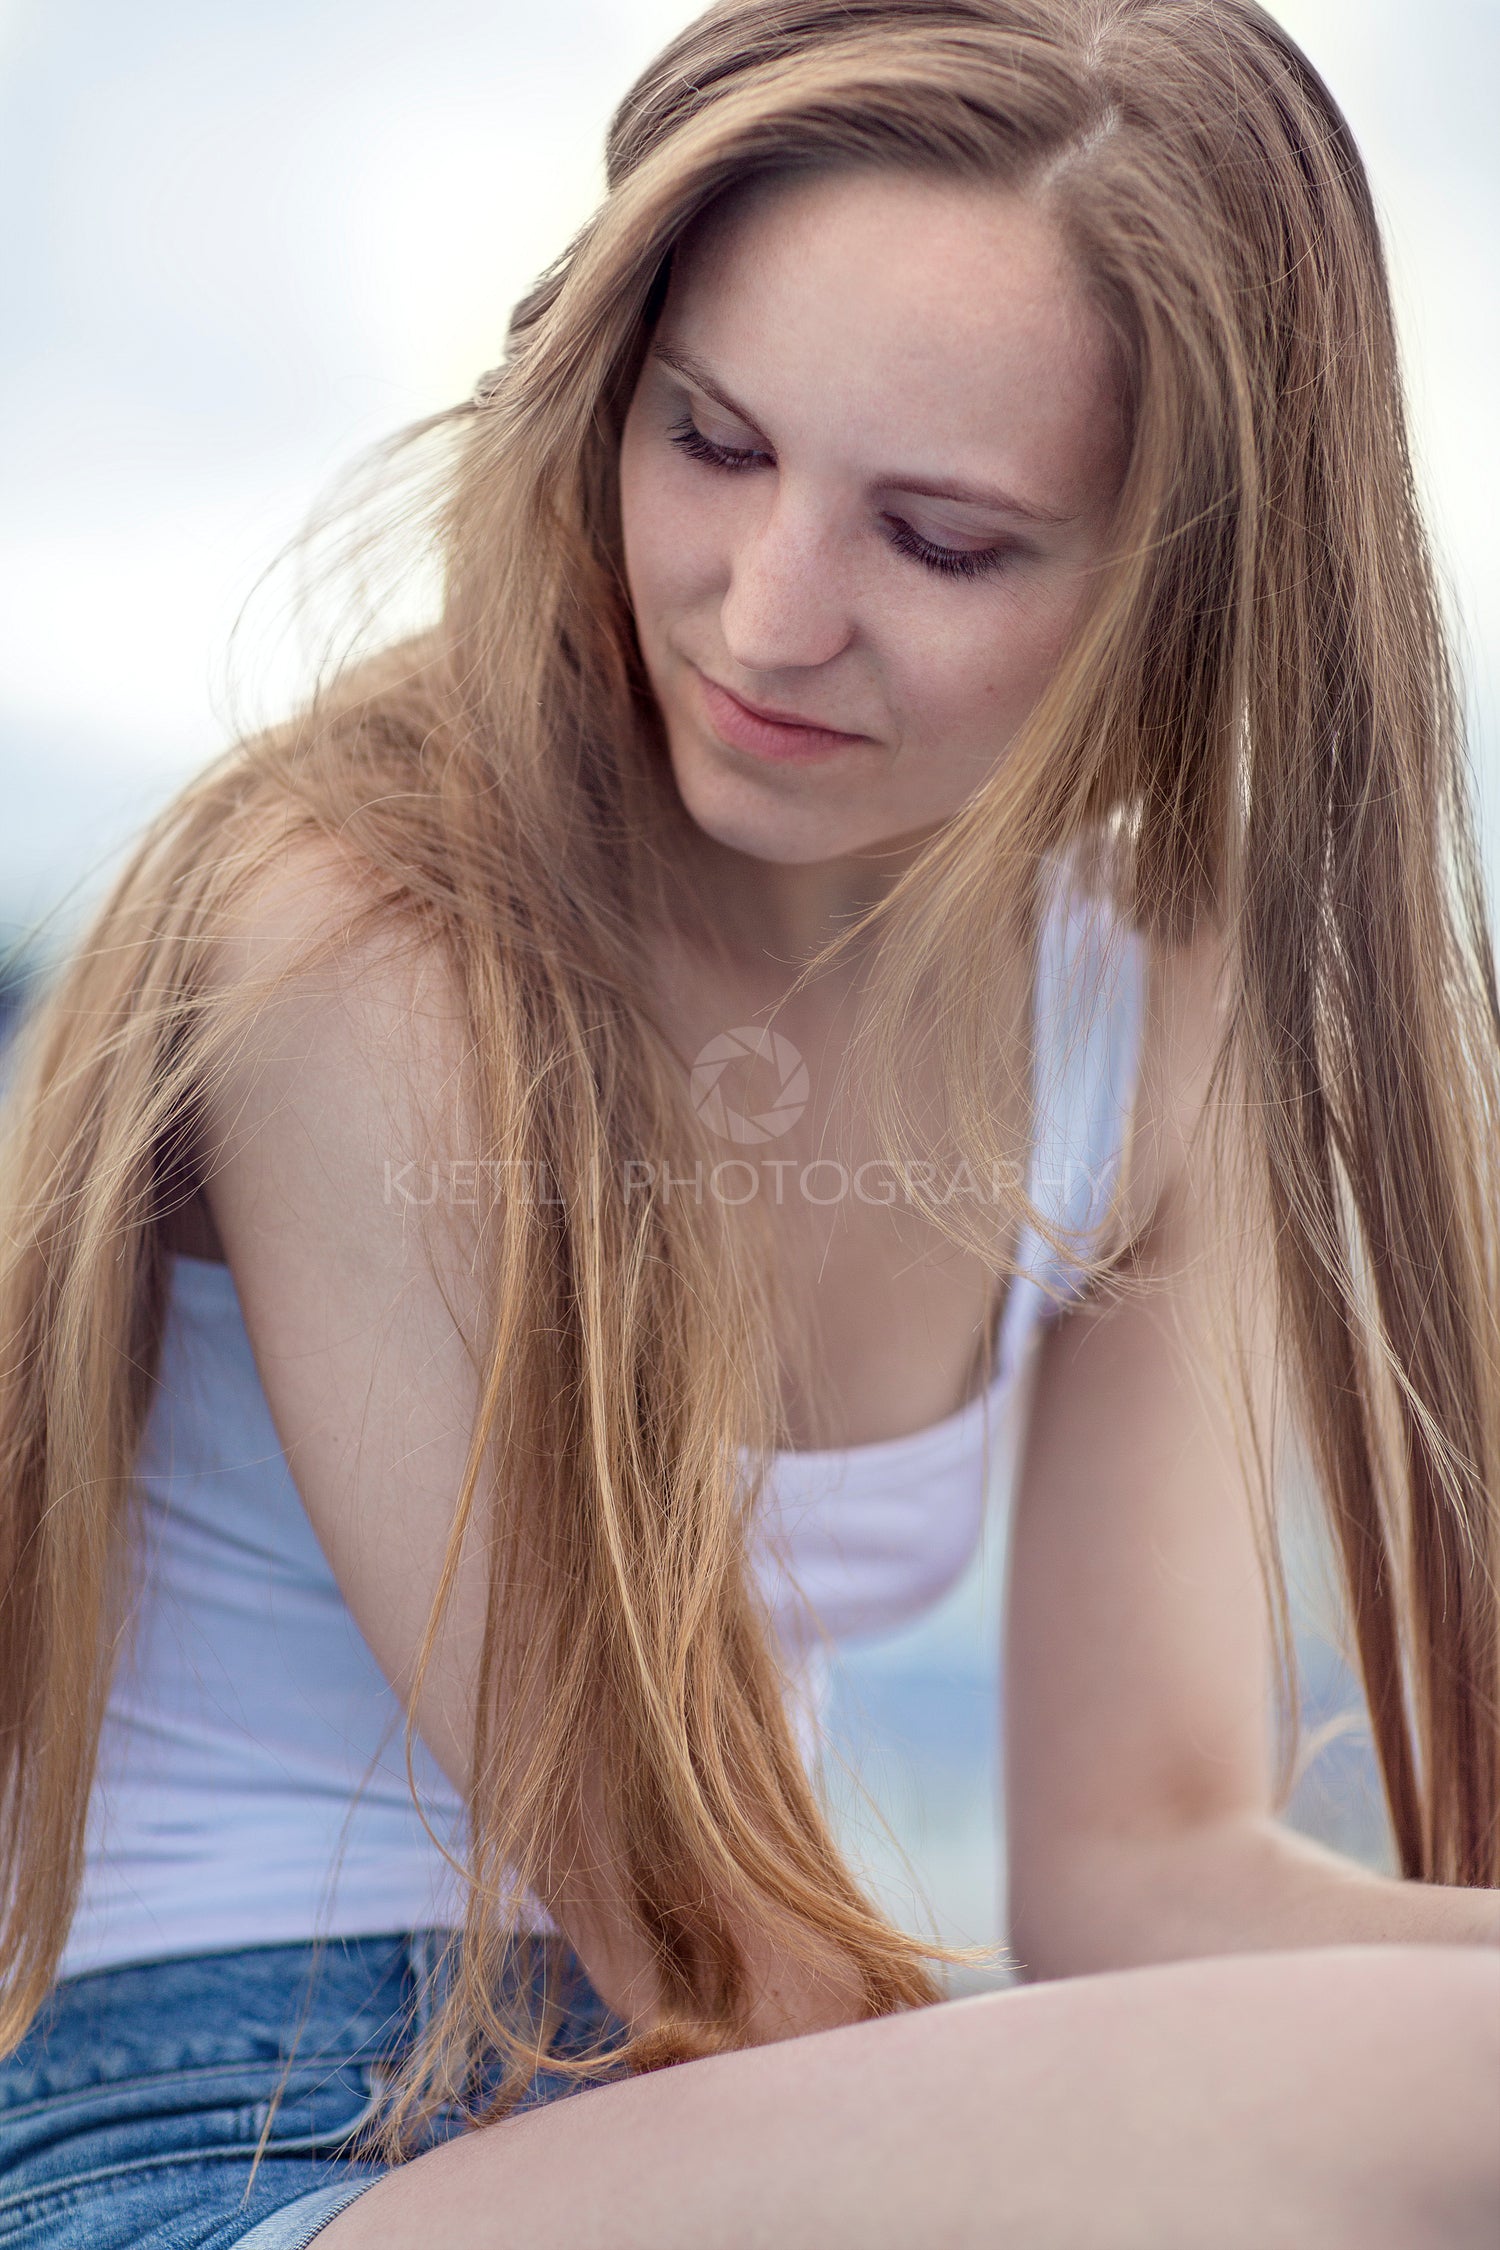 Thinking young model woman sitting outdoor